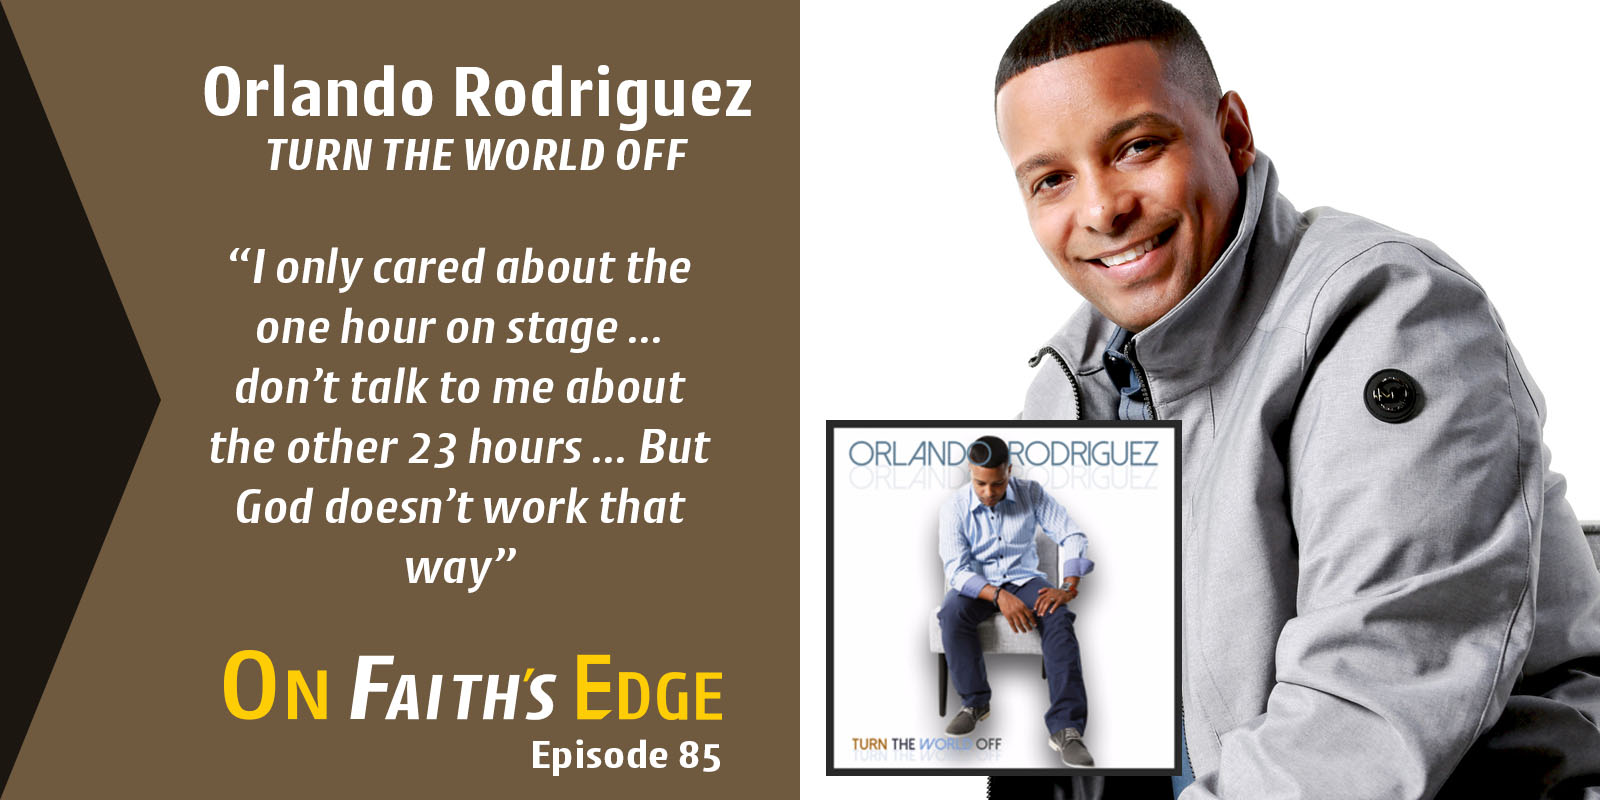 The Importance of “Just One” with Singer-Songwriter Orlando Rodriguez | Episode 85